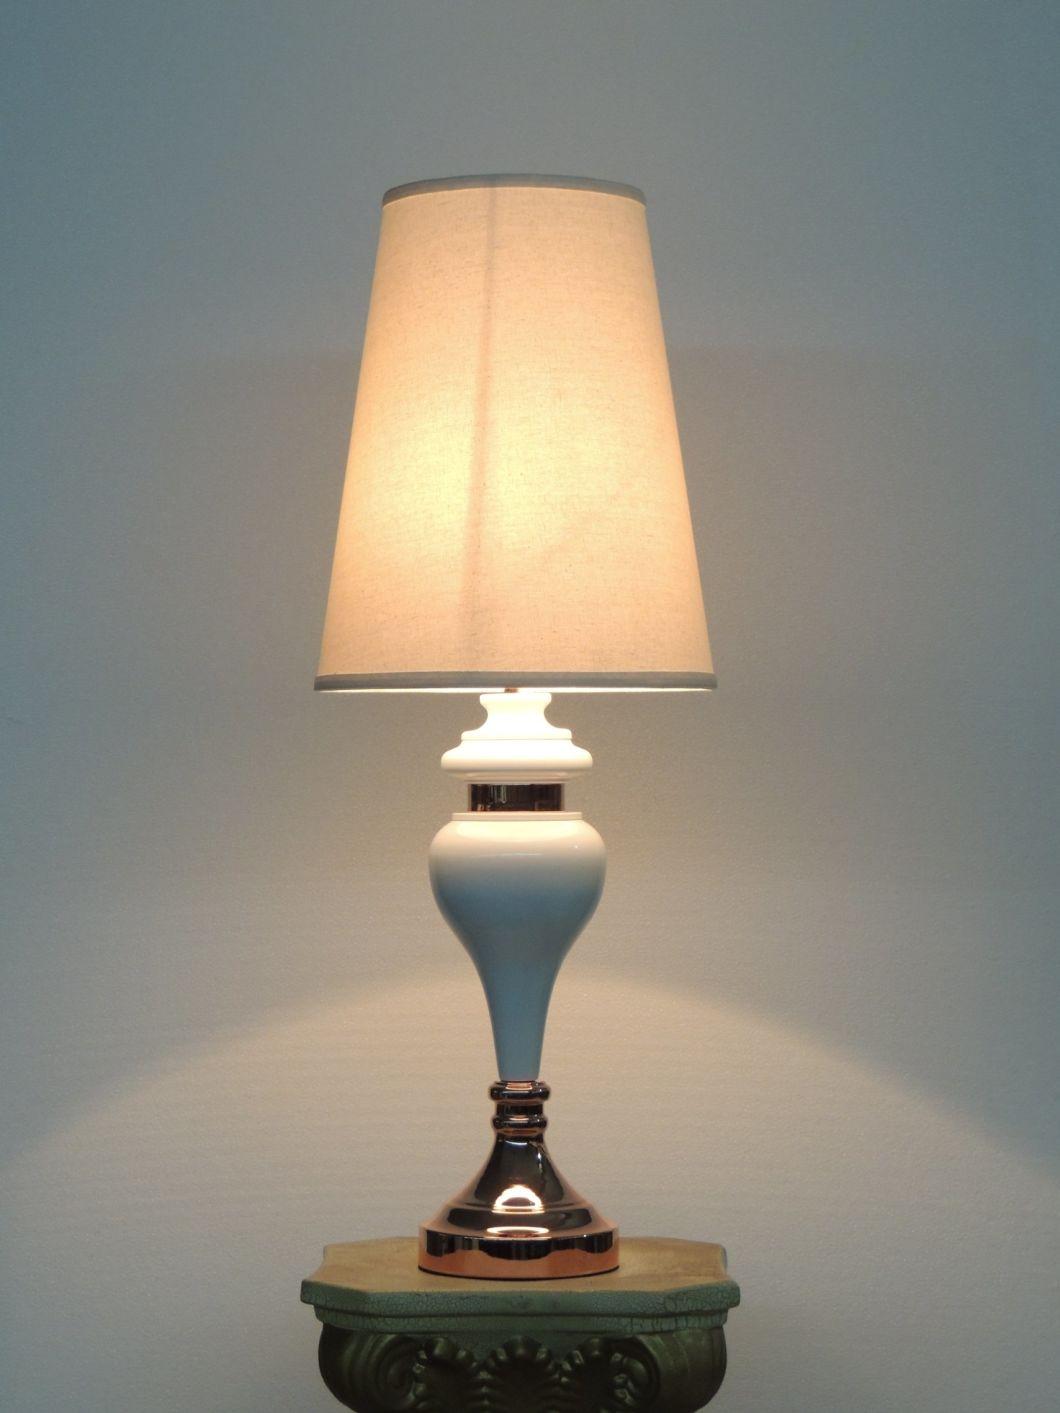 Ceramic Lamp Body and Metal Base in Polished Copper Finish Table Lamp.